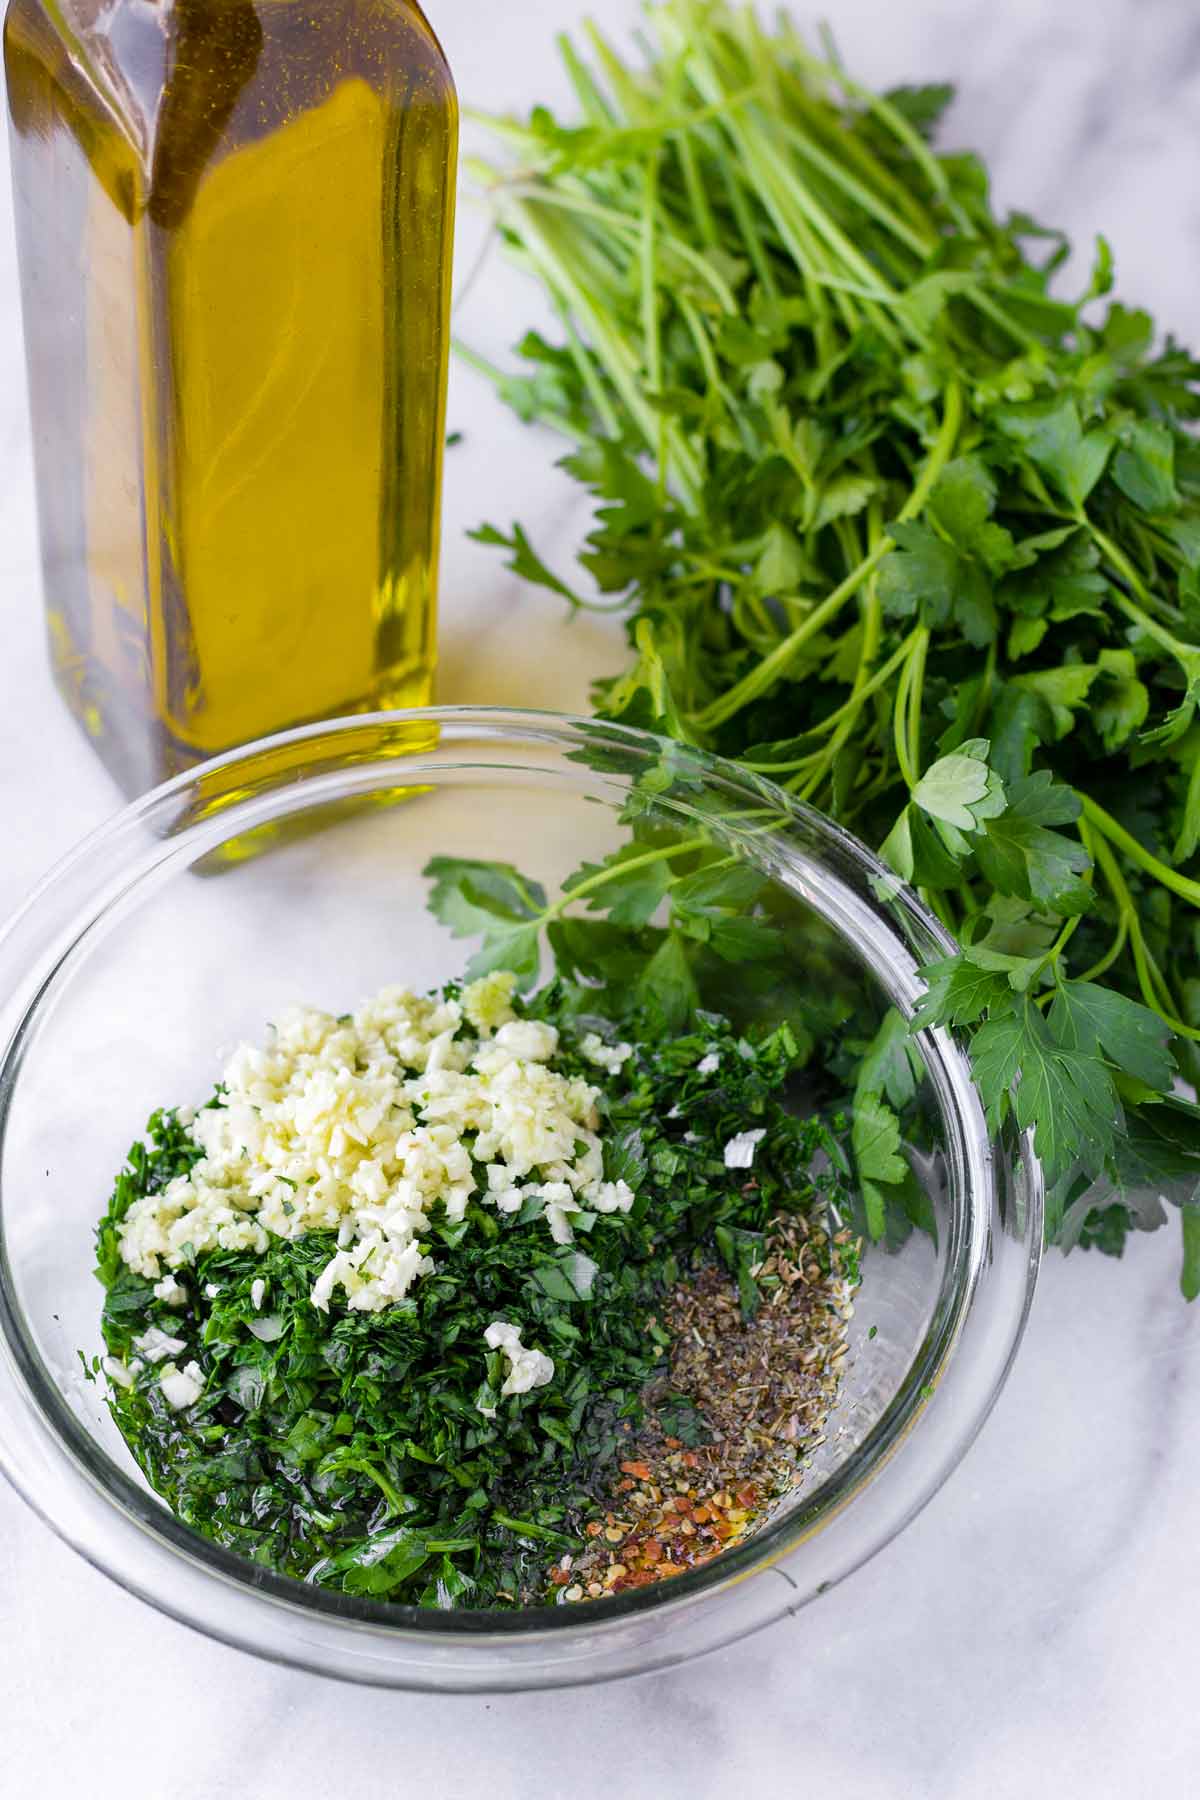 unmixed ingredients in a bowl next to parsley and a bottle of olive oil